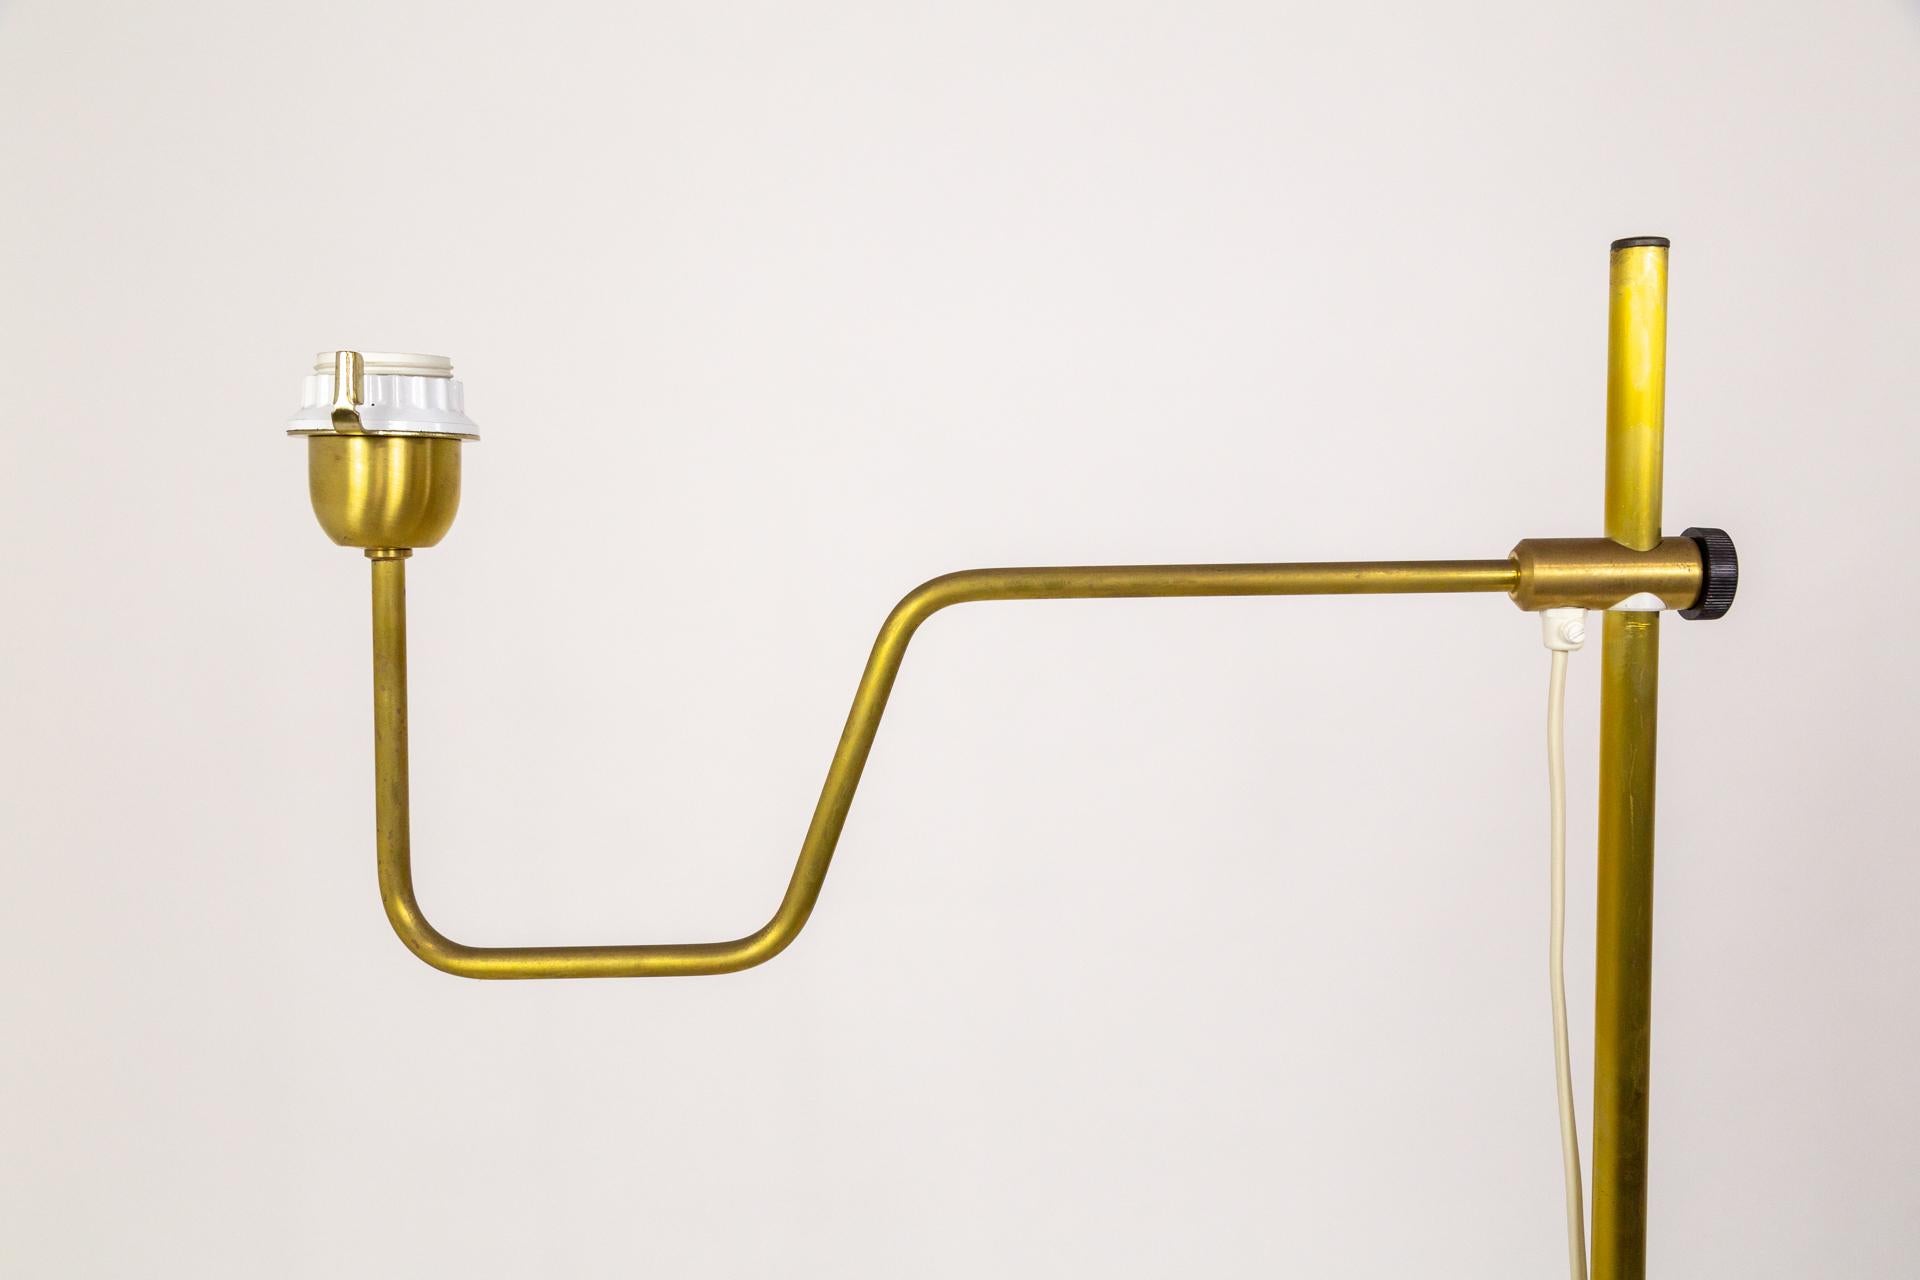 A pair of adjustable brass floor lamps by Markaryd in Sweden; designed by Hans Agne Jakobsson in the mid-20th century. (Maker's sticker on the bottom). 

Height: 67 in (170.18 cm)
Width: 25 in (63.5 cm)
Depth: 13 in (33.02 cm)